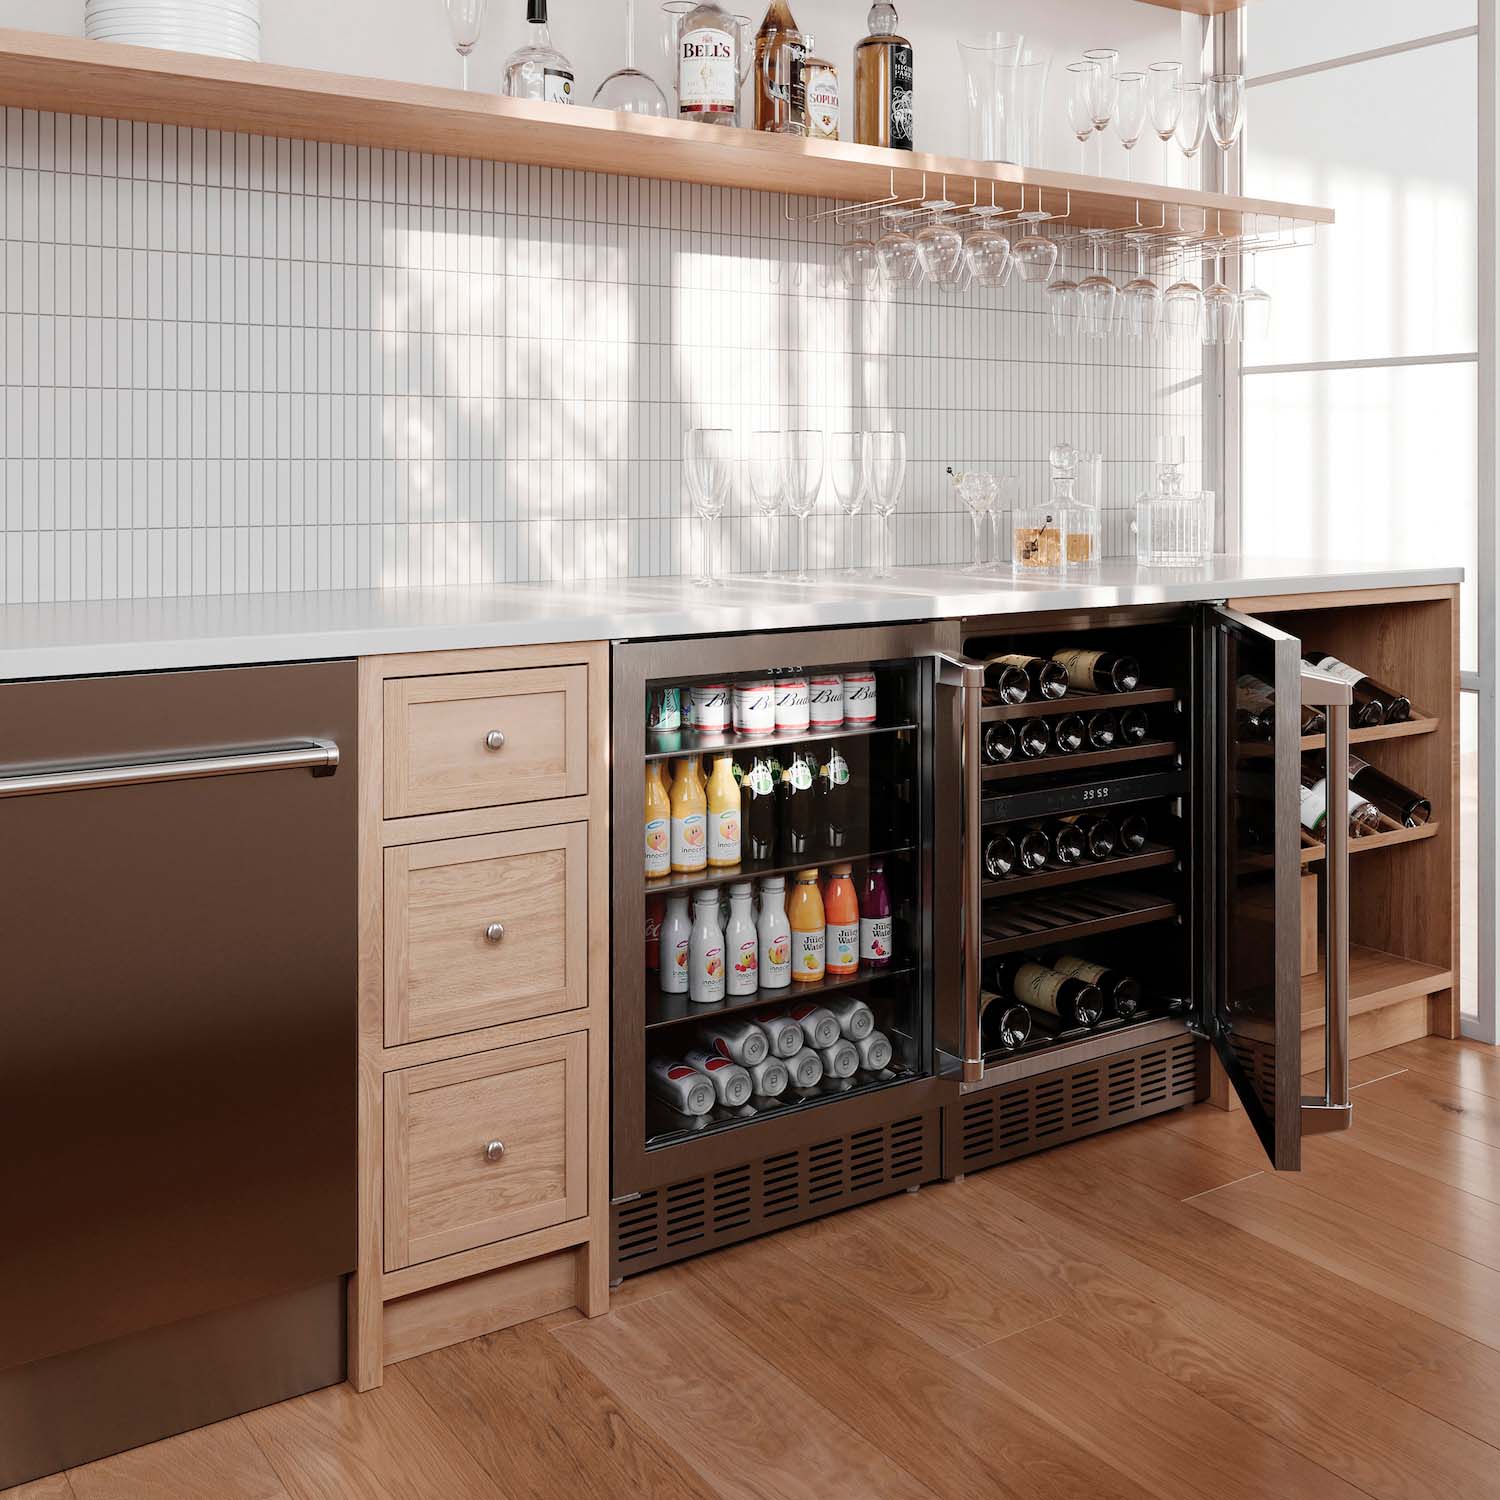 Monument beverage fridge and wine cooler in a home bar area